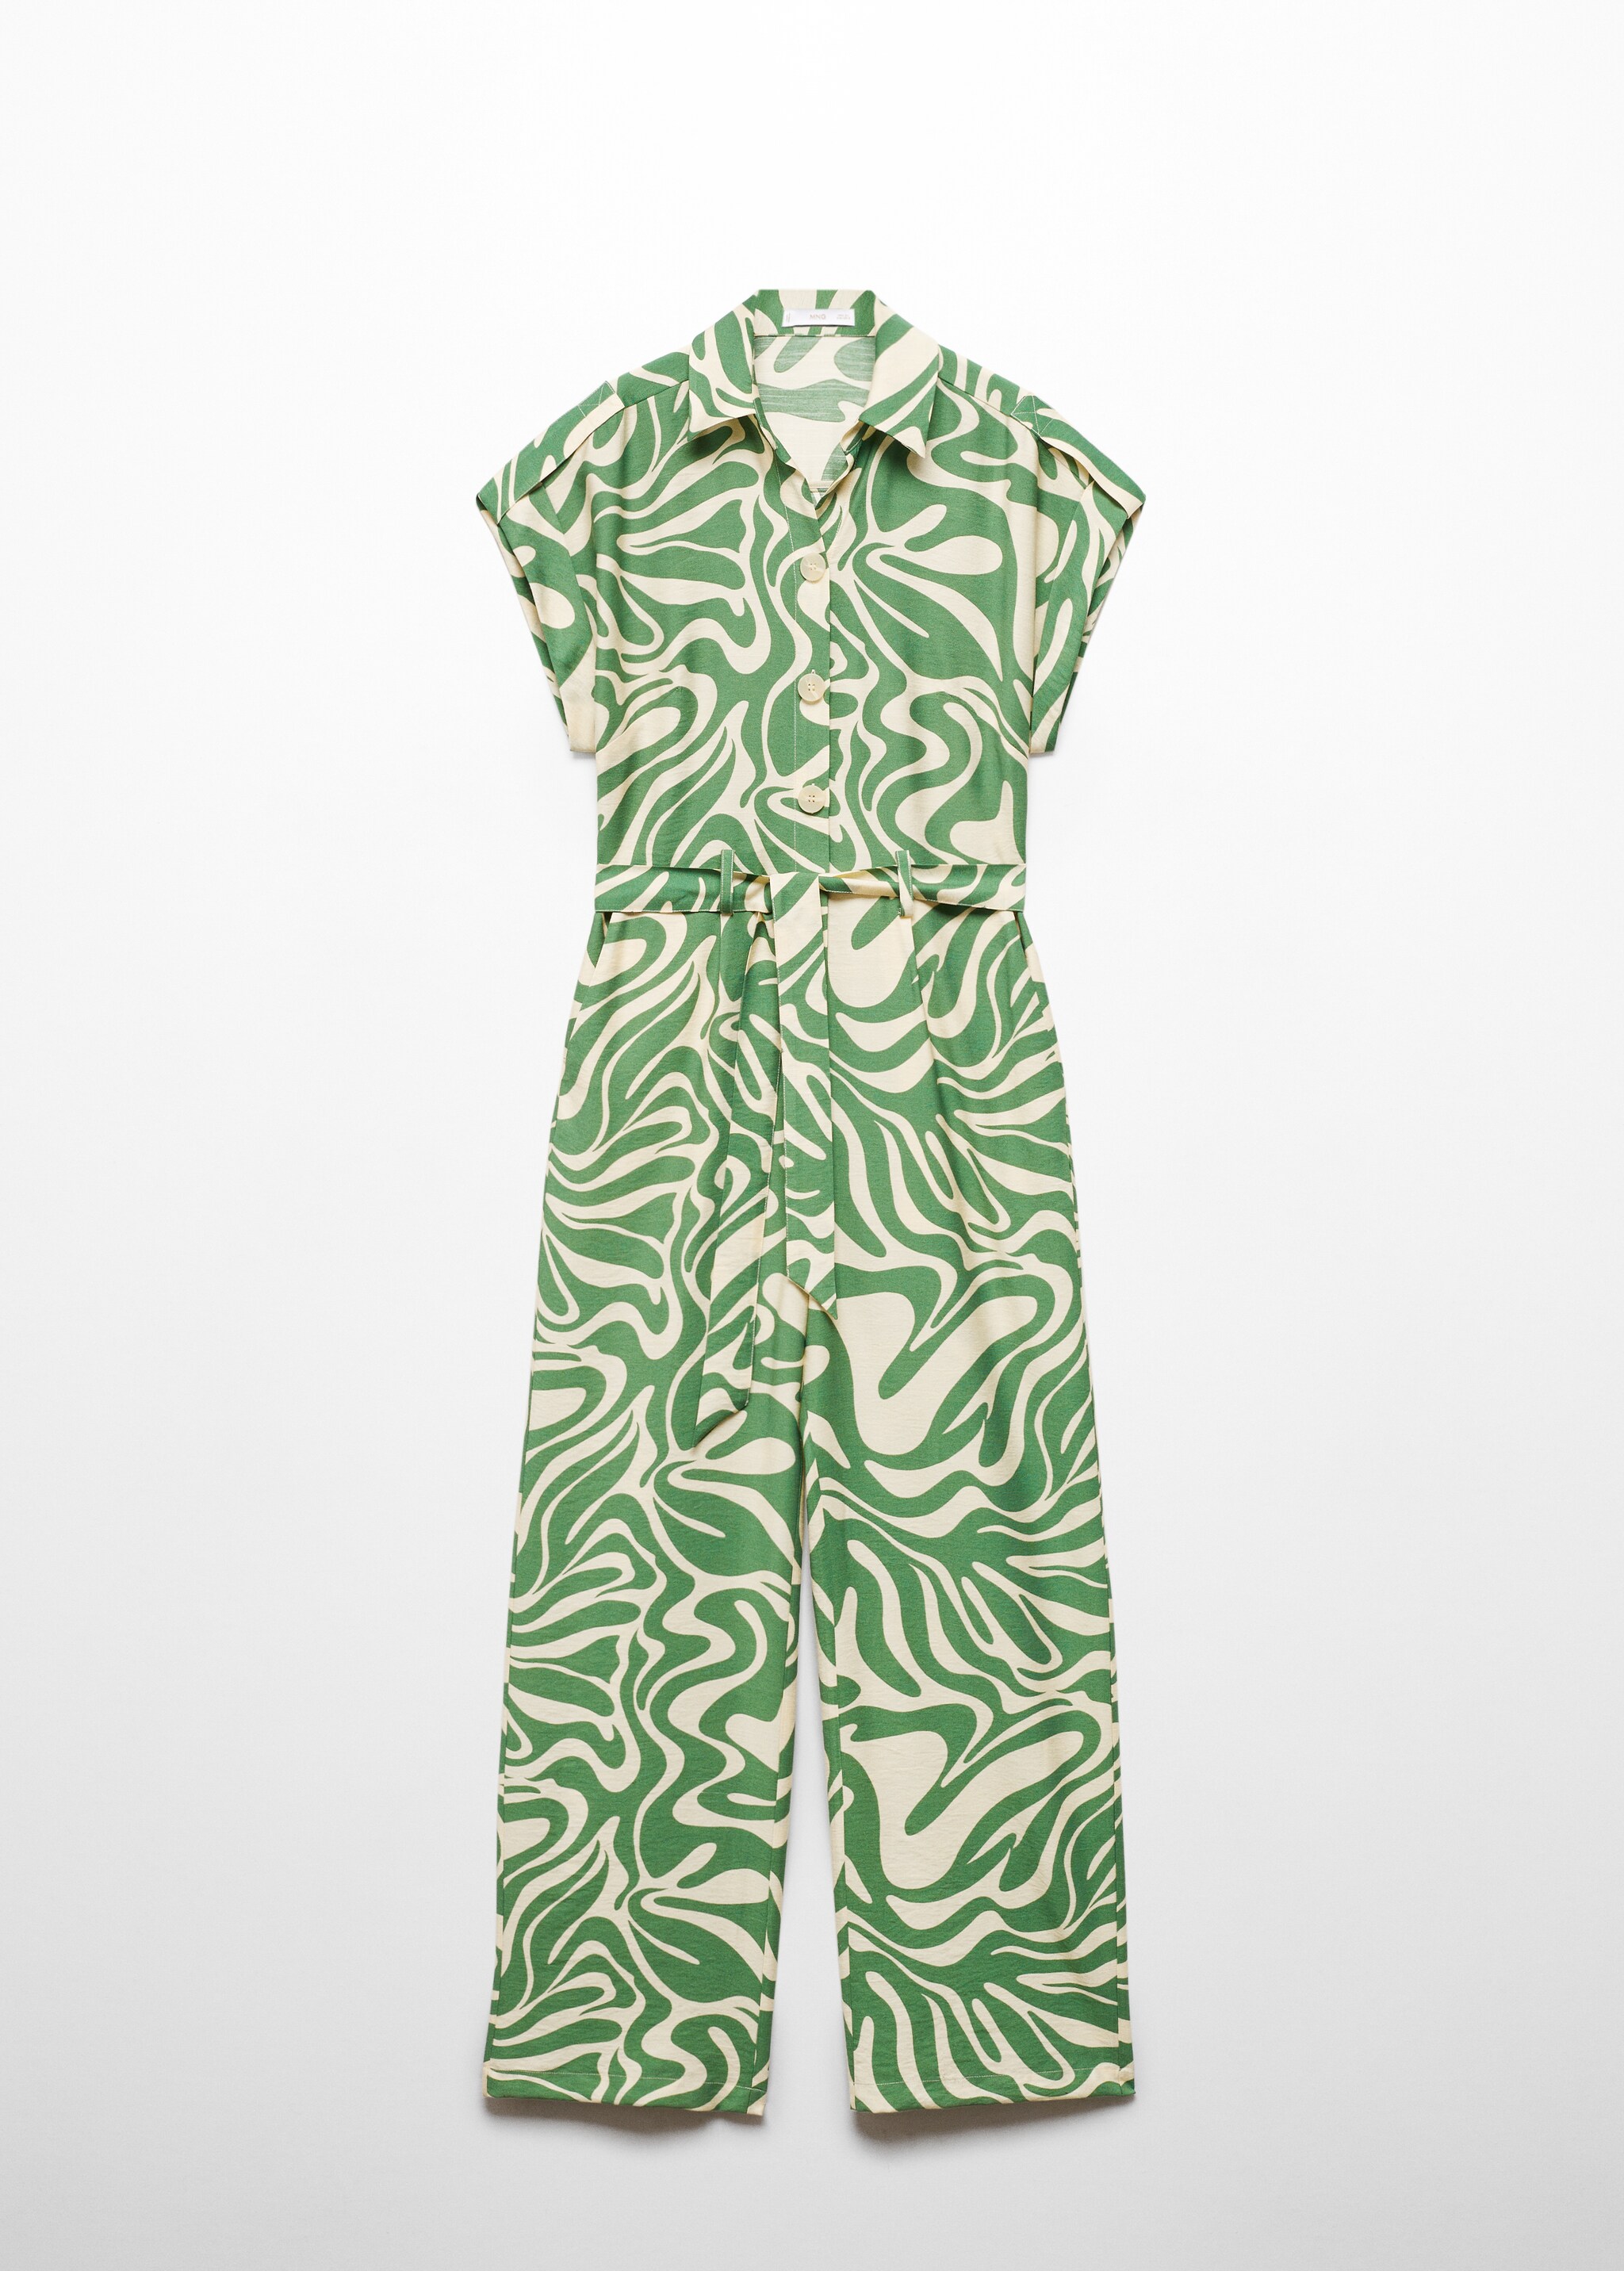 Printed shirt jumpsuit - Article without model